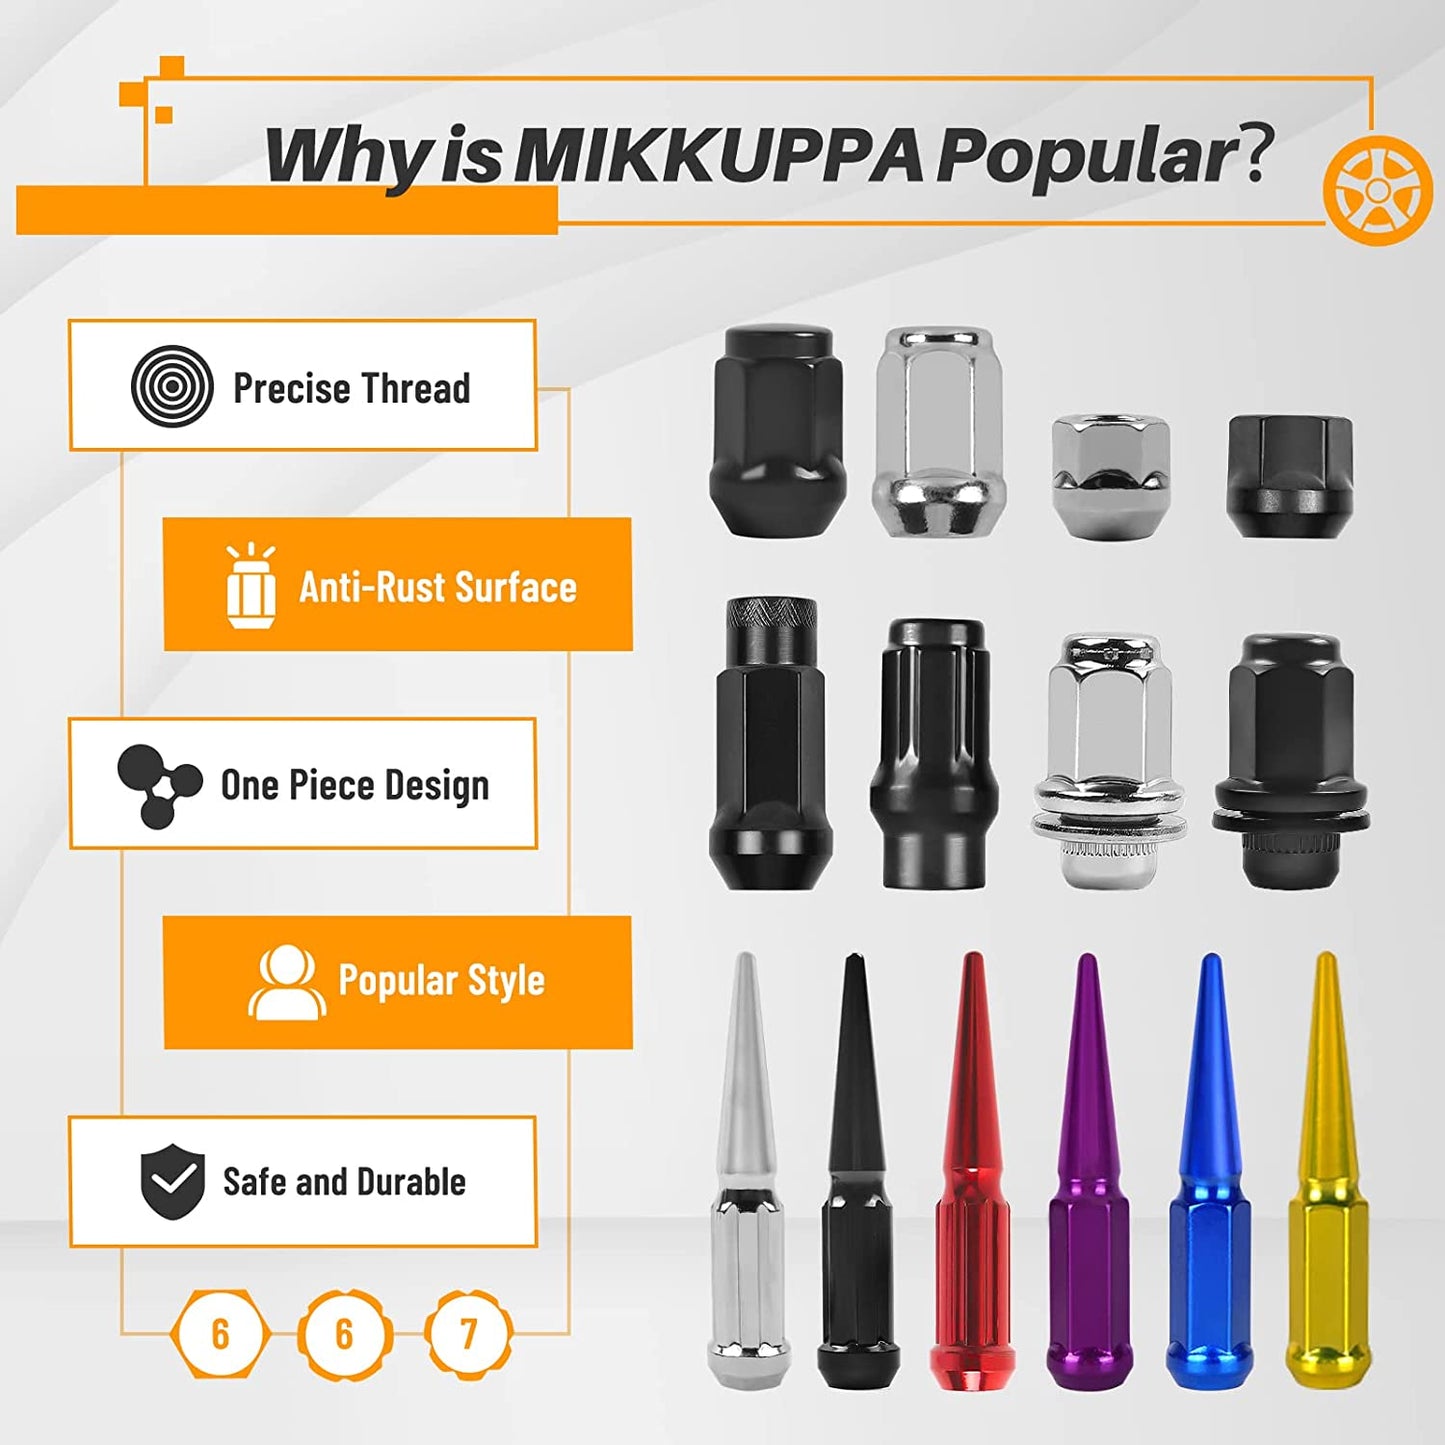 MIKKUPPA M14x1.5 Wheel Spike Lug Nuts, 32 PCS Red Spiked Lug Nuts 14mmx1.5  Solid 4.4 Tall Acorn Lug Nut with 1 Socket Key Replacement for Silverado